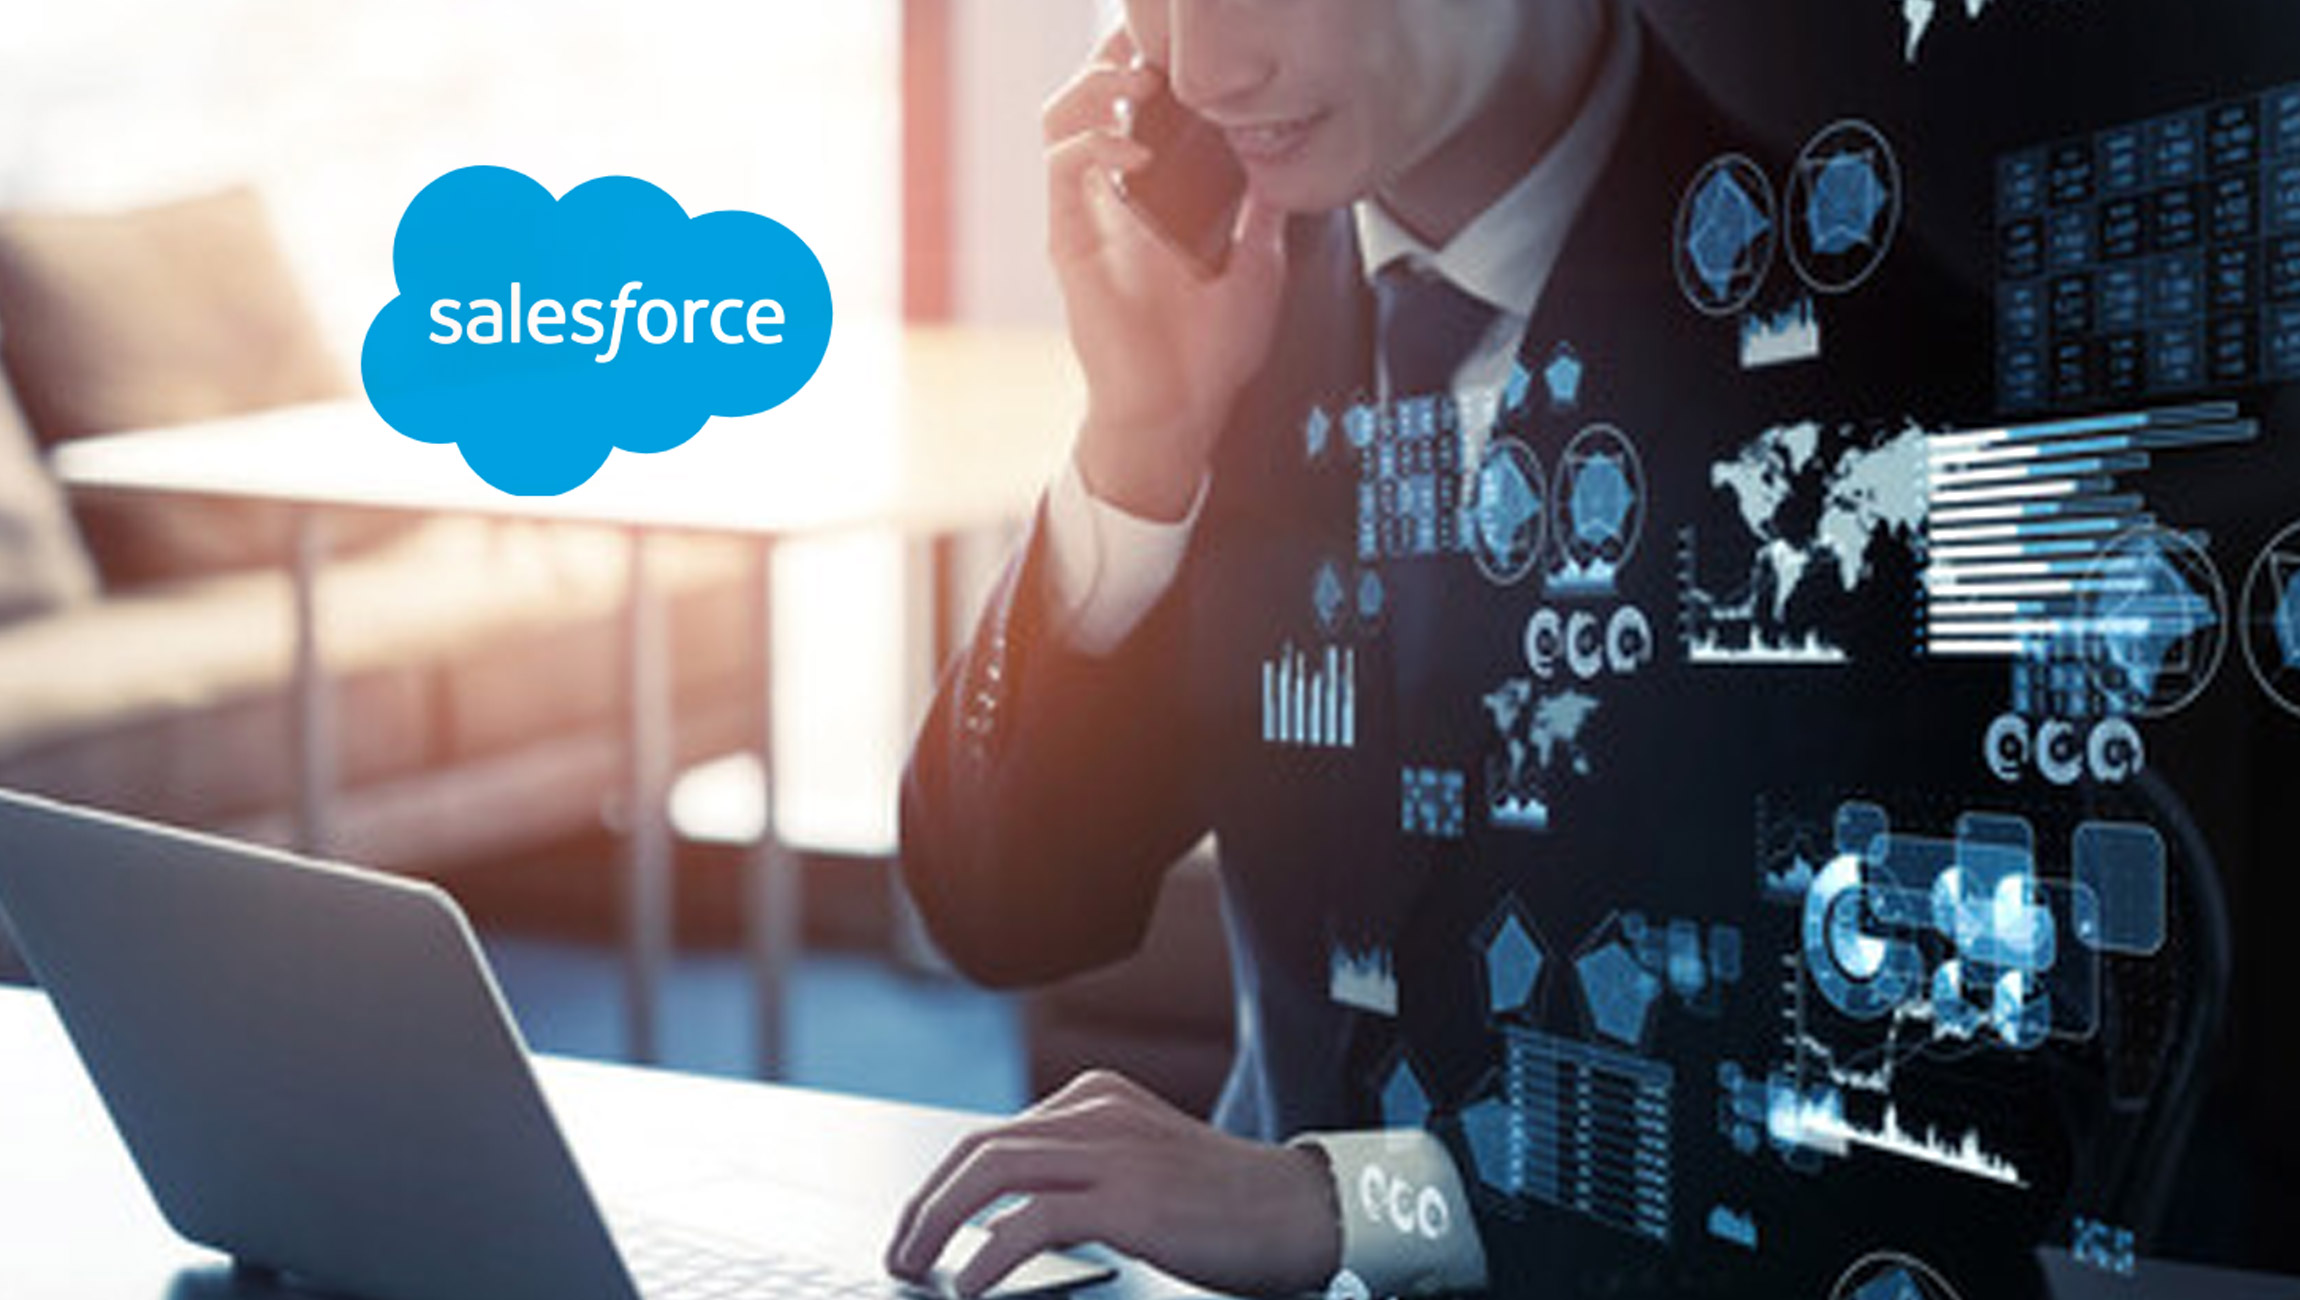 Salesforce Positioned as a Leader in Gartner Magic Quadrant™ for Digital Commerce for Seventh Consecutive Year